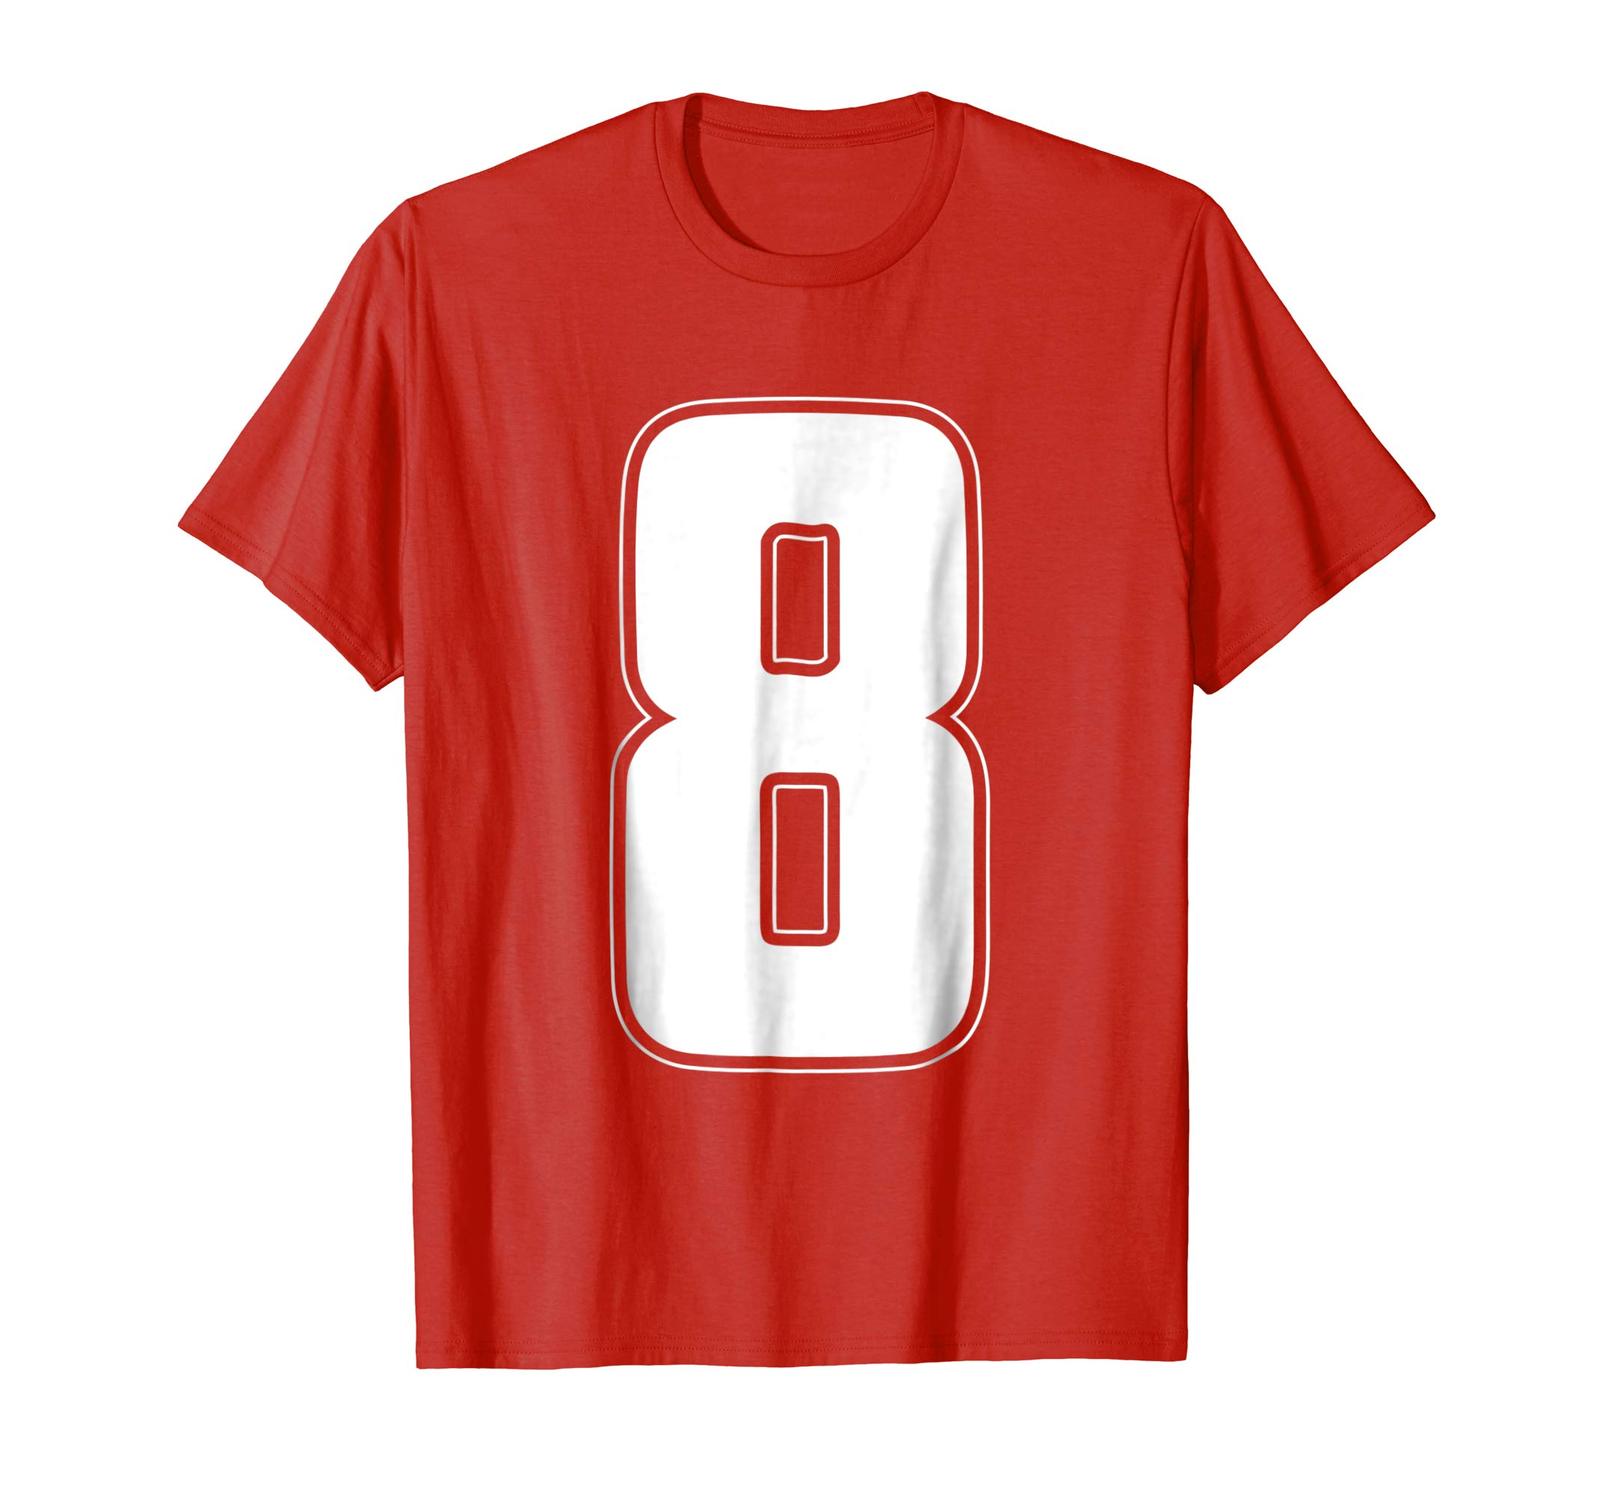 Halloween Shirts - Halloween Group Costume #8 Sports Jersey Number 8 ...